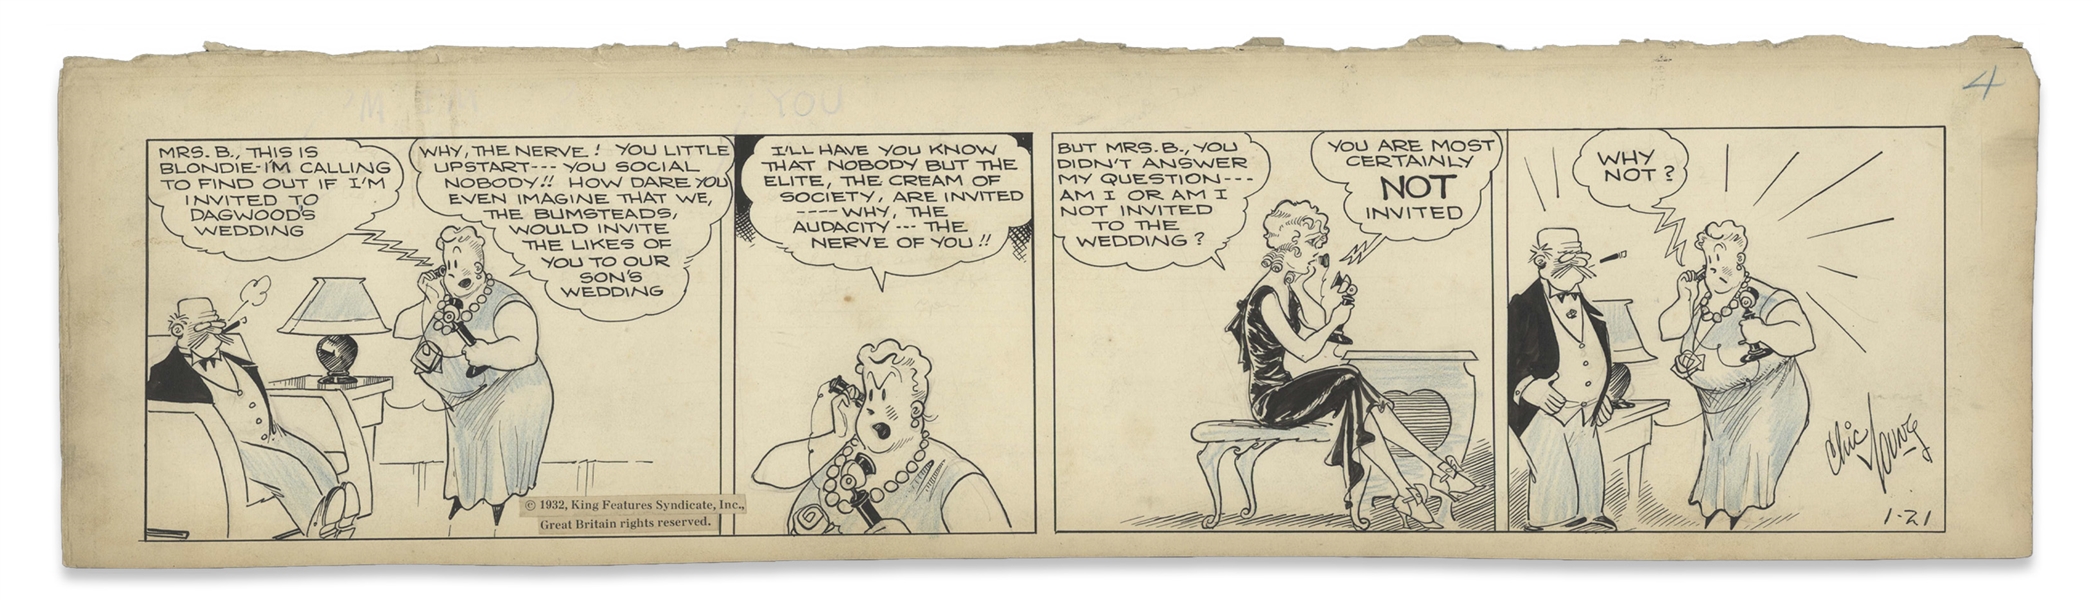 Chic Young Hand-Drawn ''Blondie'' Comic Strip From 1932 Titled ''Unconvinced!'' -- Blondie's Sweet Naivete Shines Through